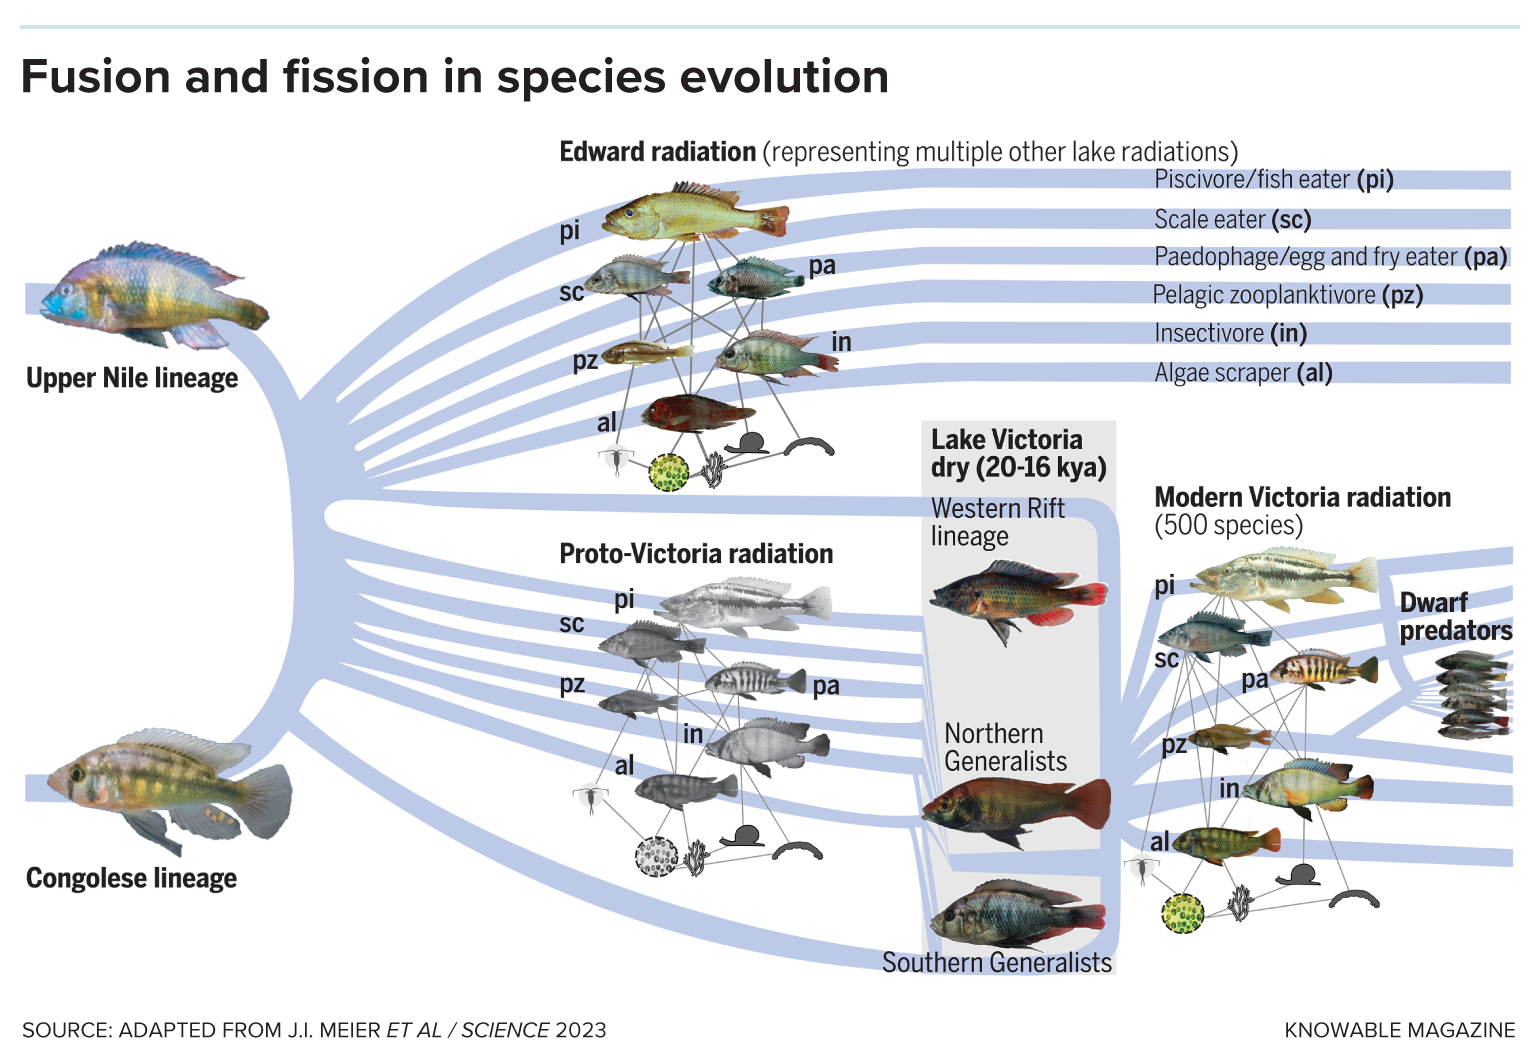 Graphic shows two hybridization events that fueled the radiation of Lake Victoria Region Superflock cichlid fishes.